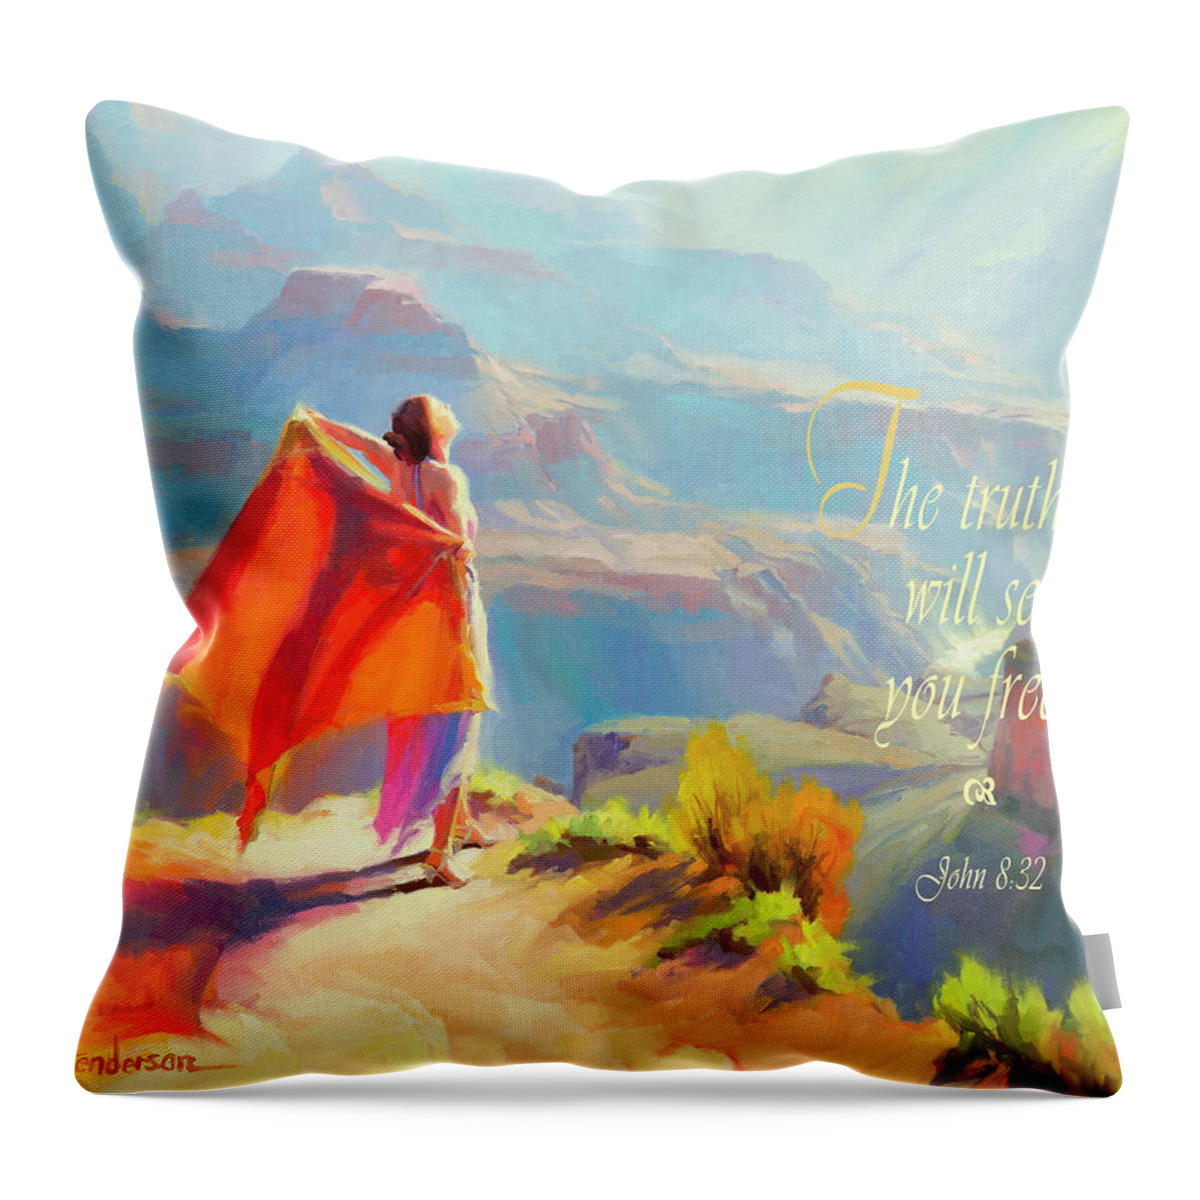 Eyrie Throw Pillow featuring the digital art The Truth Will Set You Free by Steve Henderson